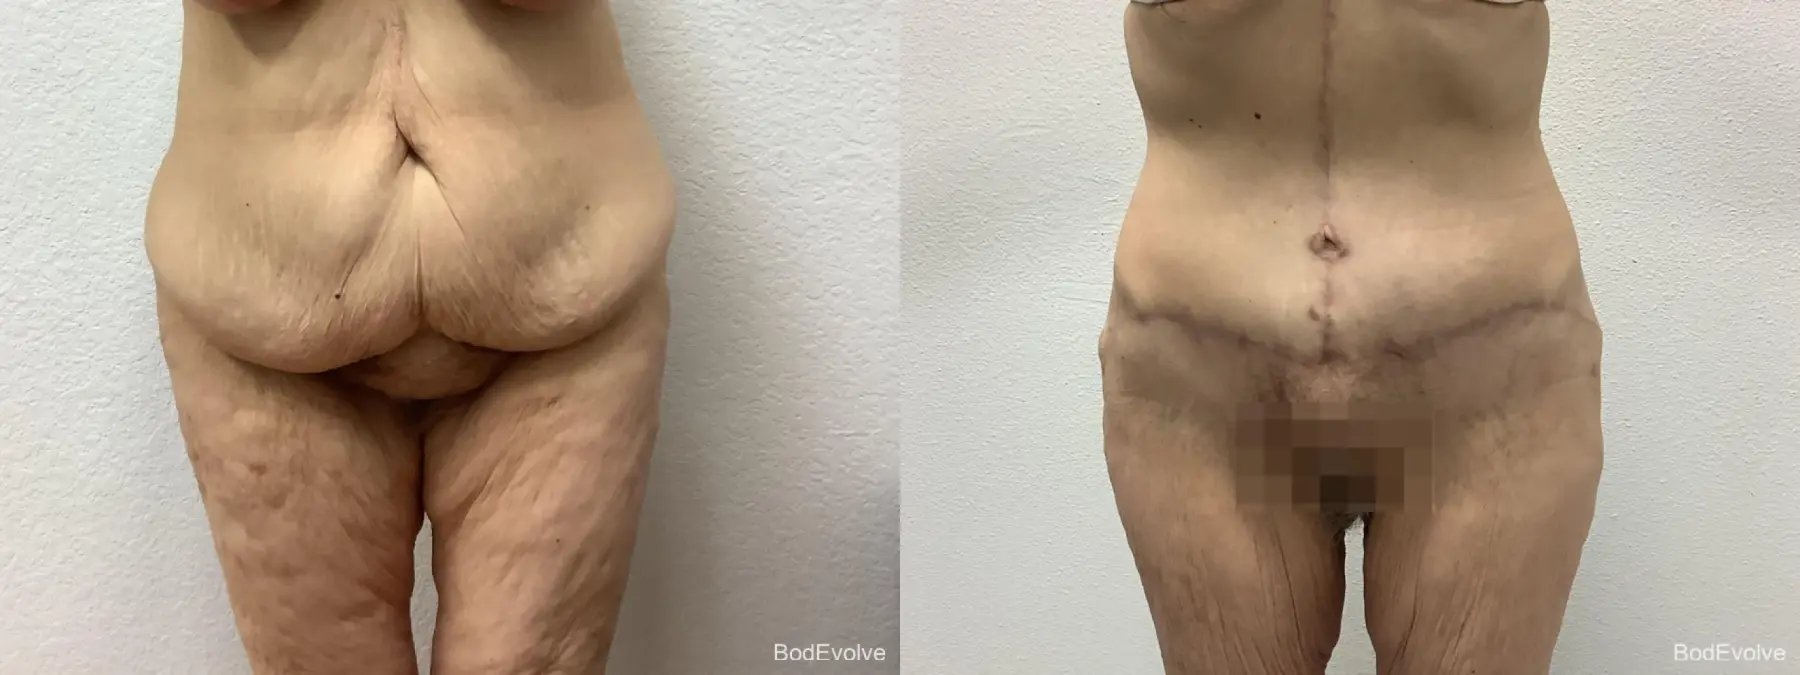 After Massive Weight Loss: Patient 3 - Before and After  